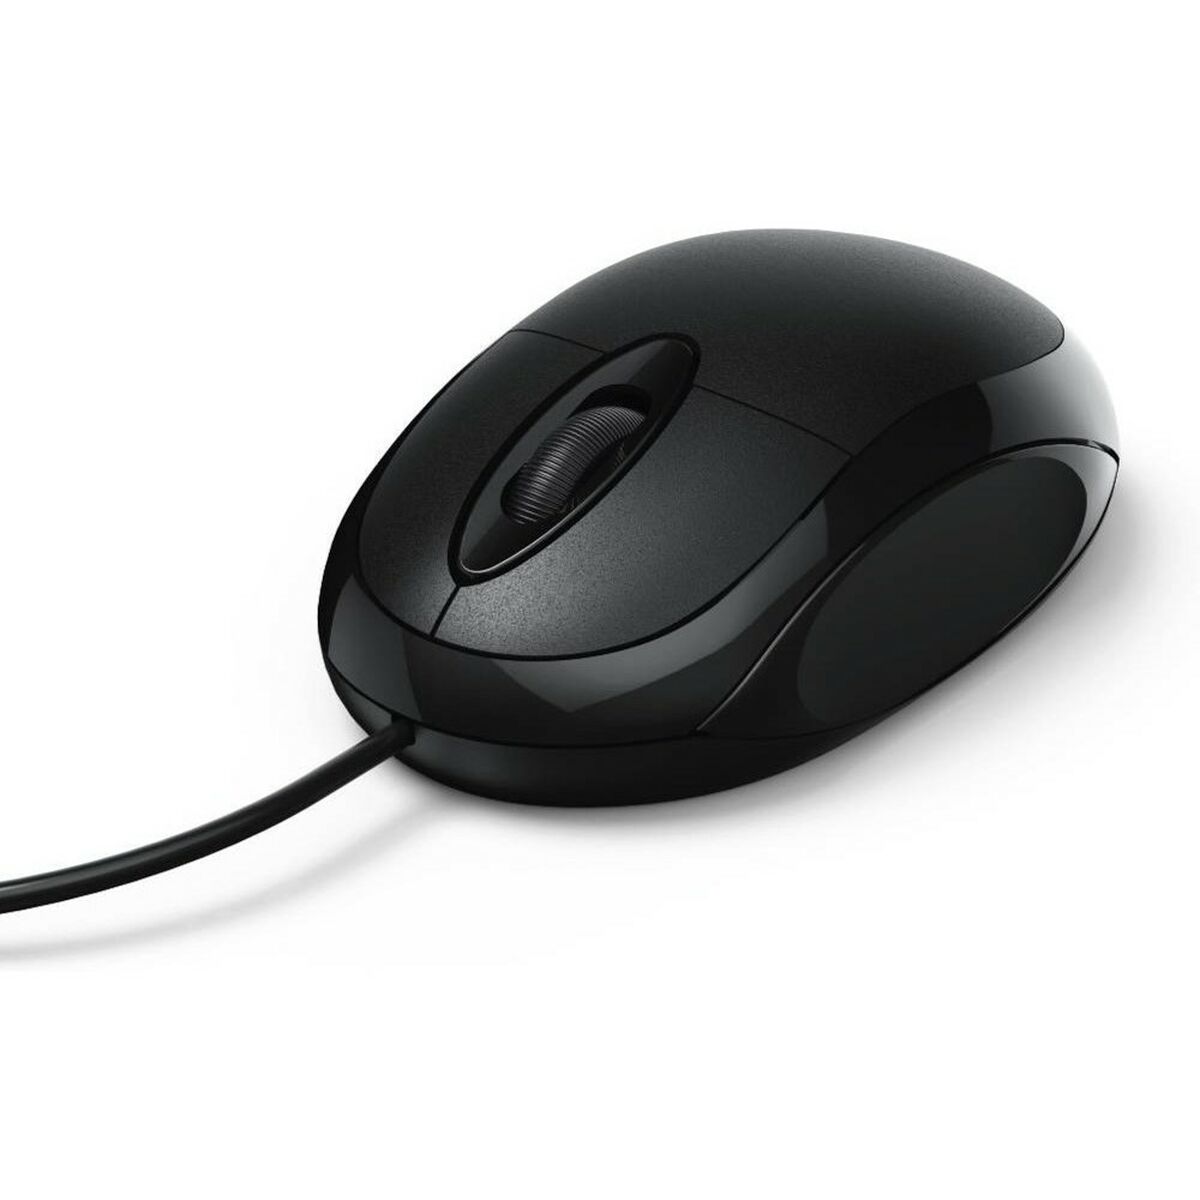 Optical mouse Hama Technics 00182600 Black 1000 dpi, Hama Technics, Computing, Accessories, optical-mouse-hama-technics-00182600-black-1000-dpi, Brand_Hama Technics, category-reference-2609, category-reference-2642, category-reference-2656, category-reference-t-19685, category-reference-t-19908, category-reference-t-21353, computers / peripherals, Condition_NEW, office, Price_20 - 50, Teleworking, RiotNook